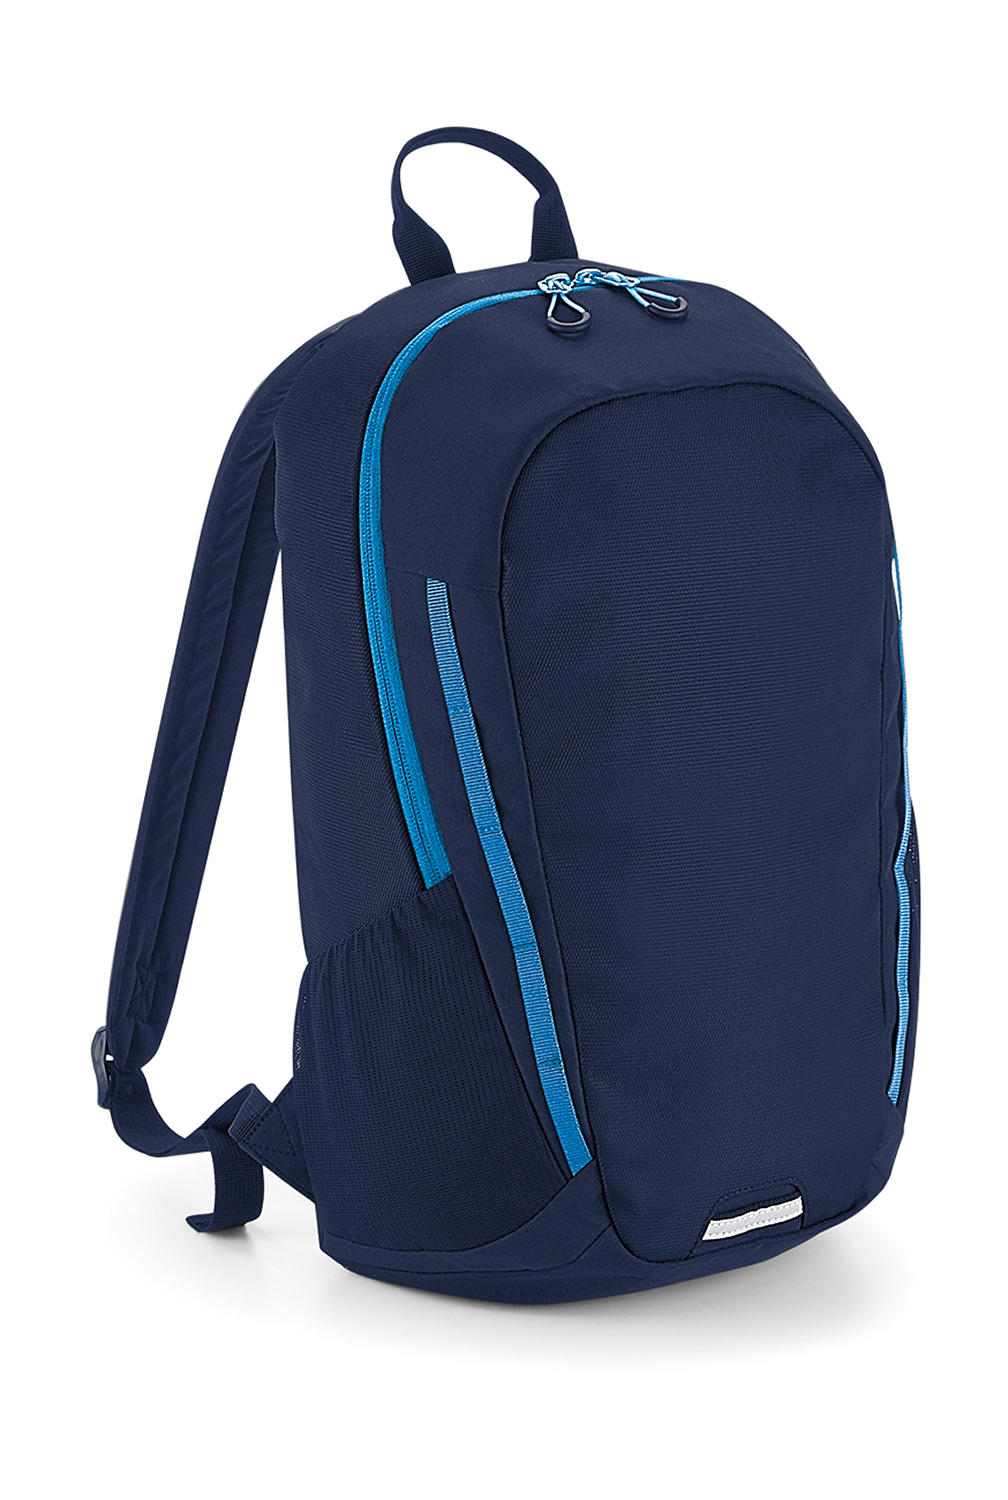  Urban Trail Pack in Farbe French Navy/Sapphire Blue